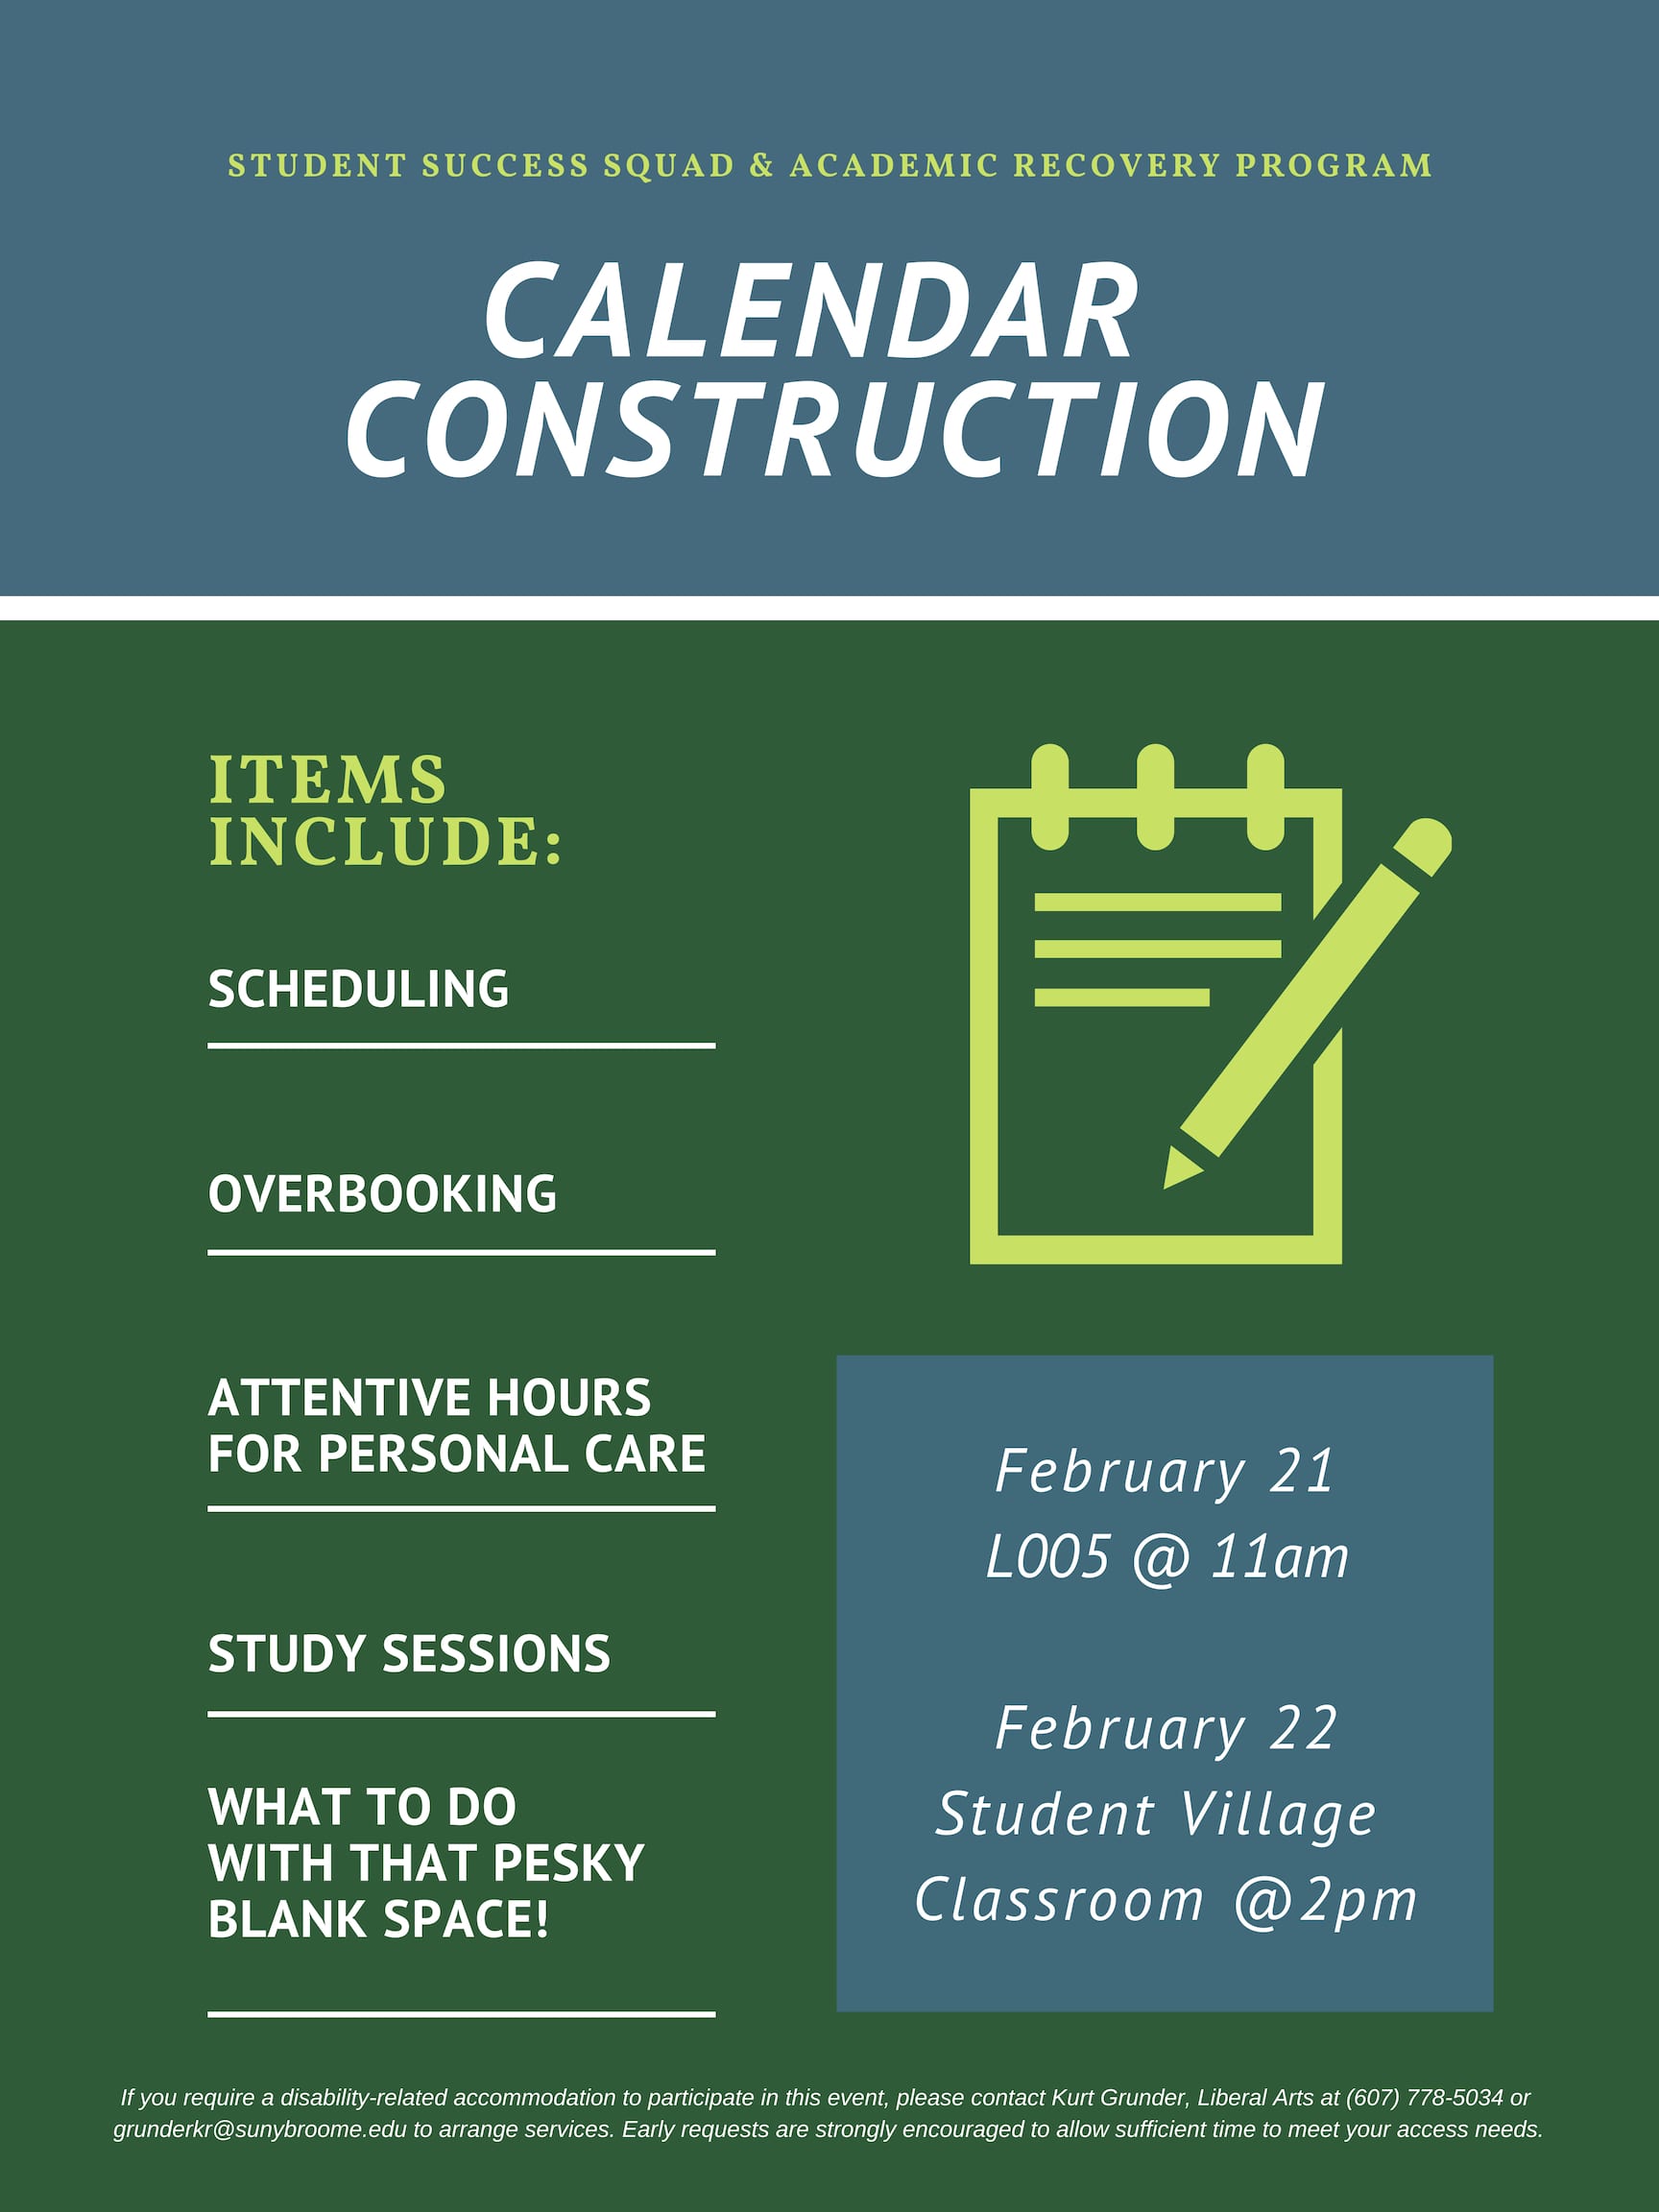 Get organized: Calendar Construction workshops on Feb. 21 and March 1